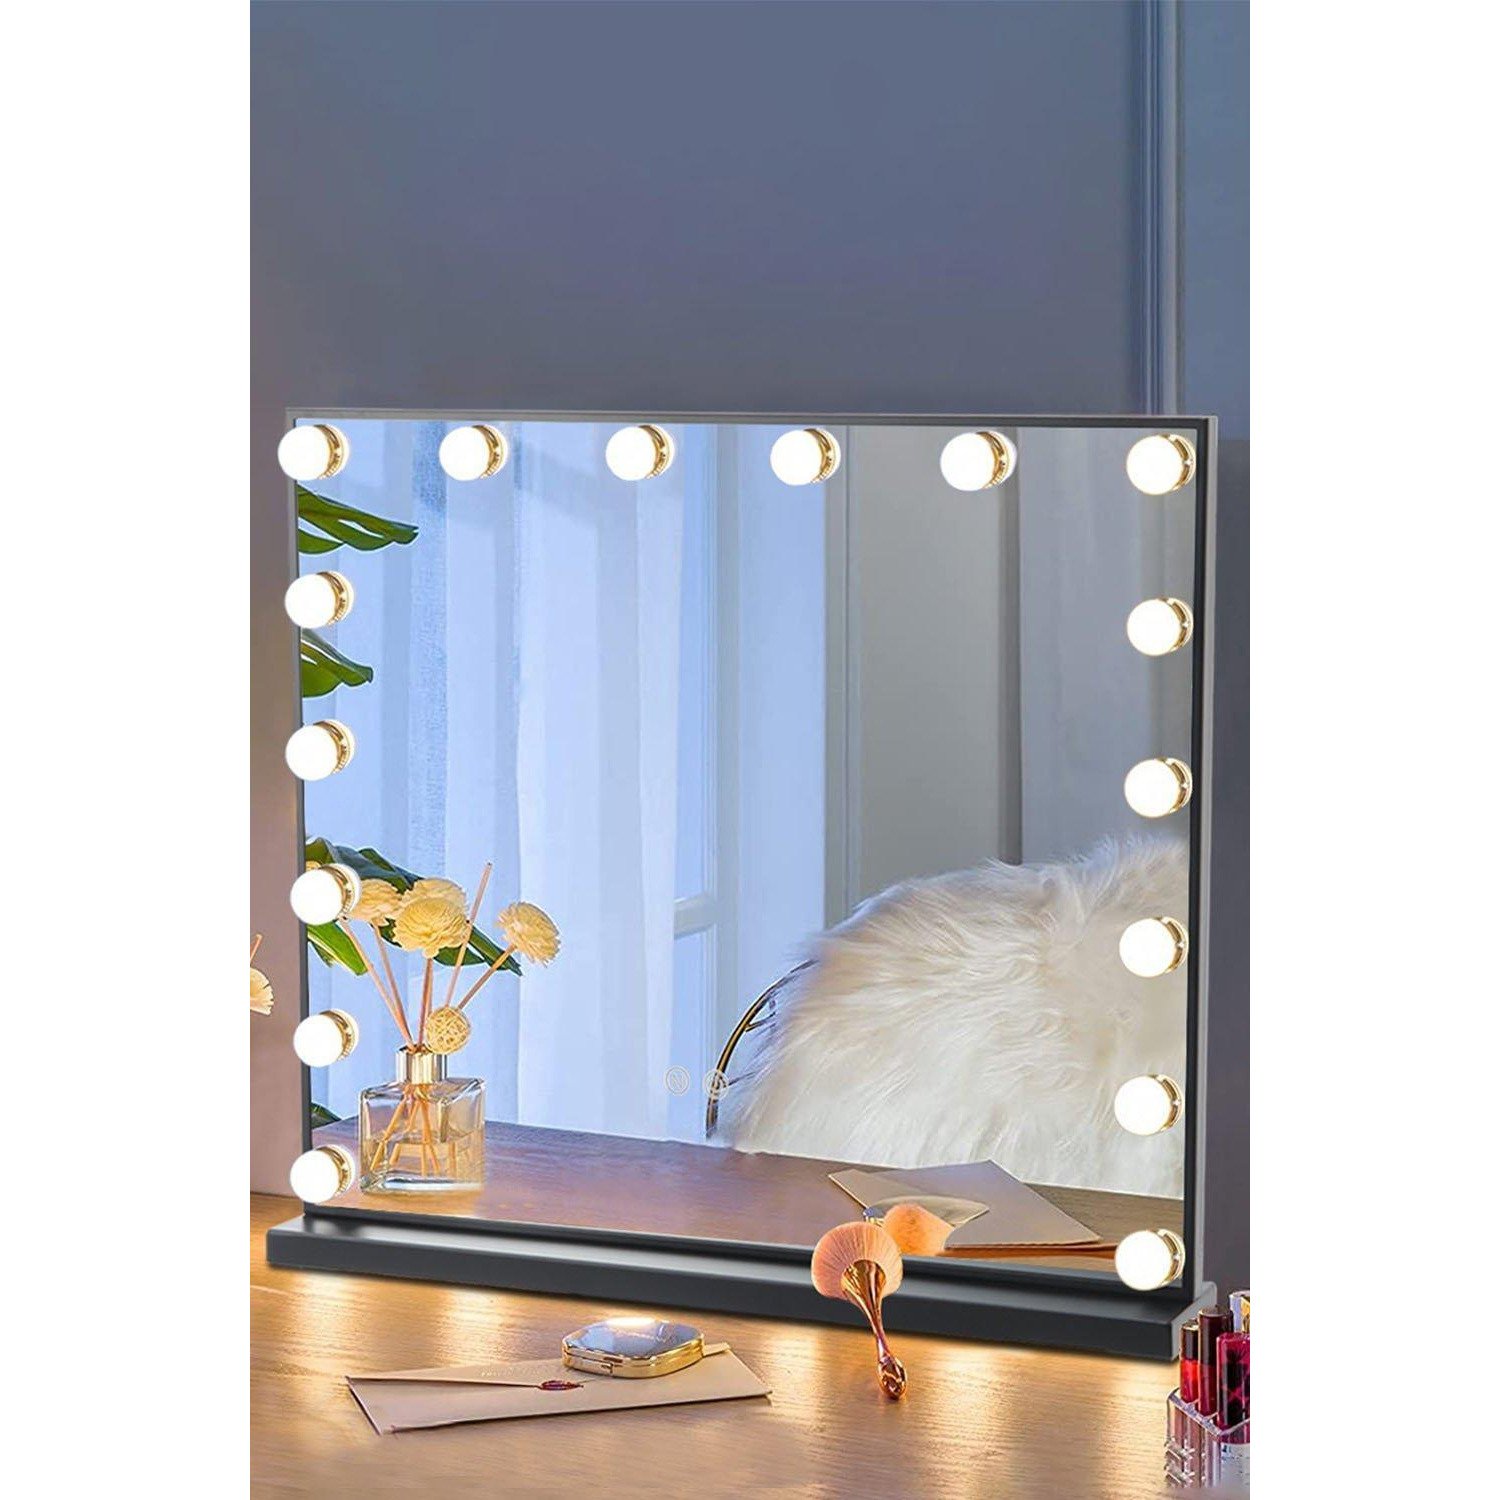 Hollywood Vanity Mirror with 3 Lighting Modes & Touch Screen Control,Tabletop Mirror For Dressing Table ＆ Home Bathroom - image 1